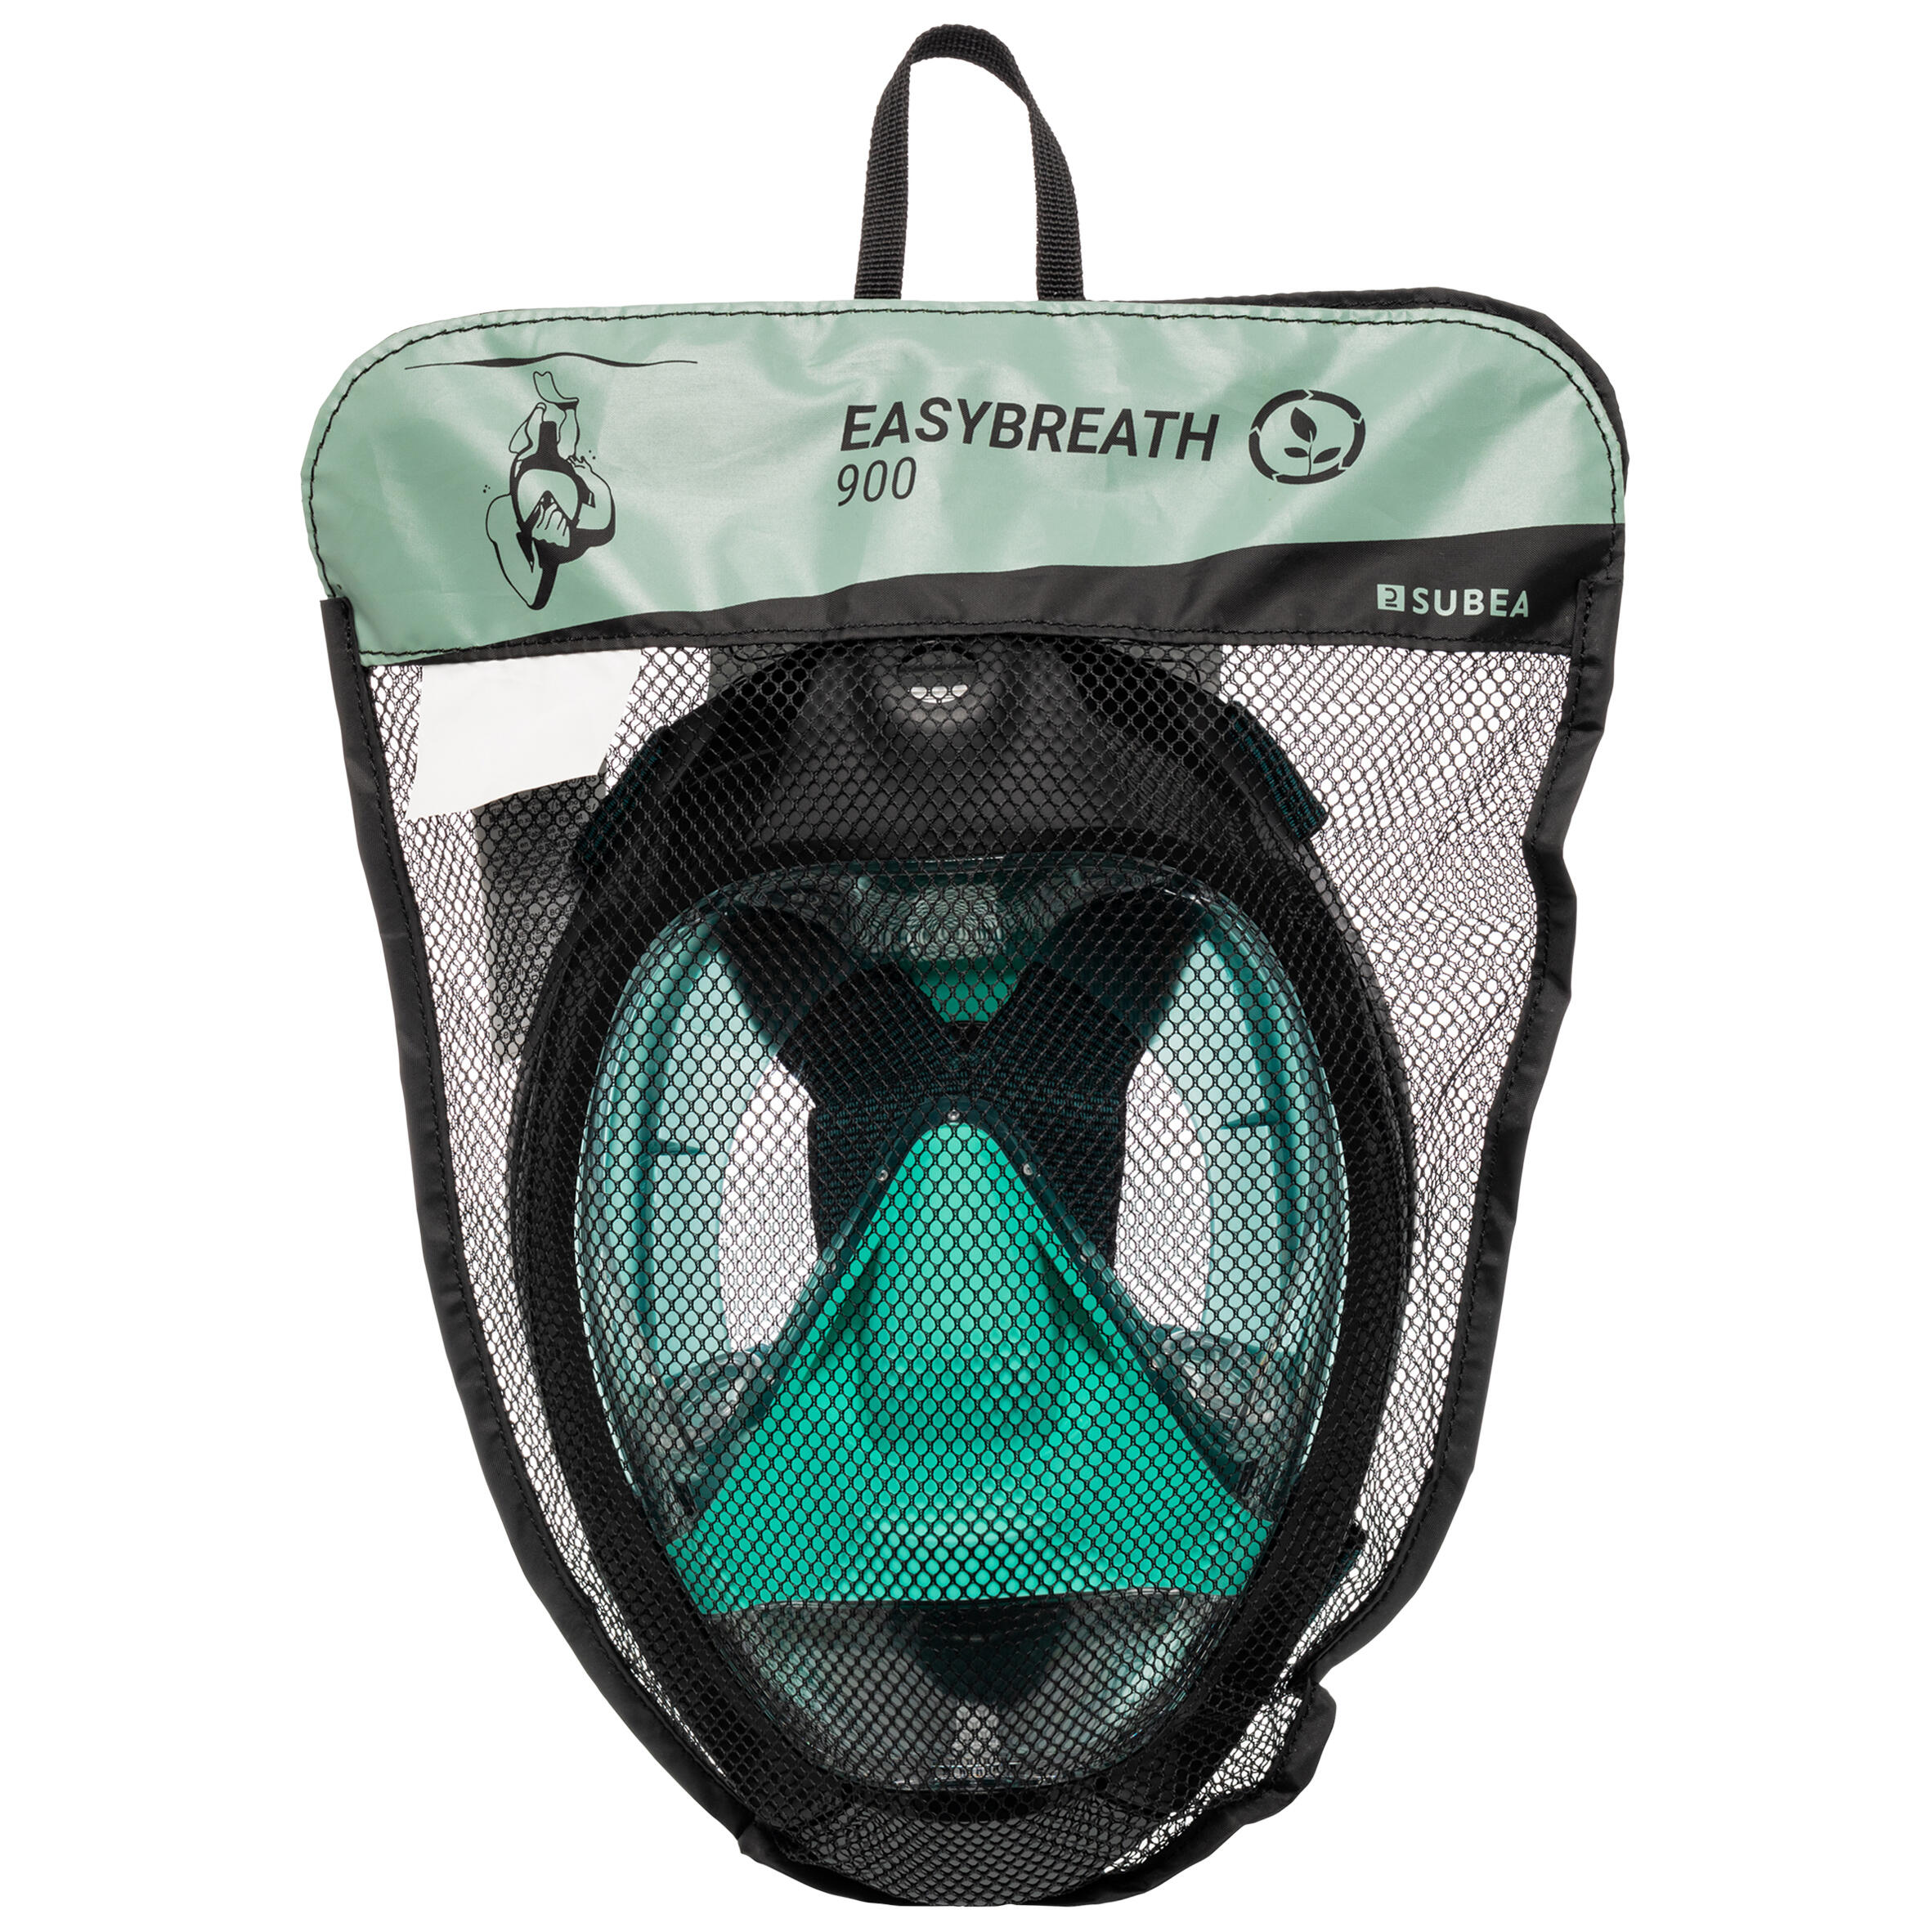 Adult’s Easybreath dive Mask 900 - Green 7/8